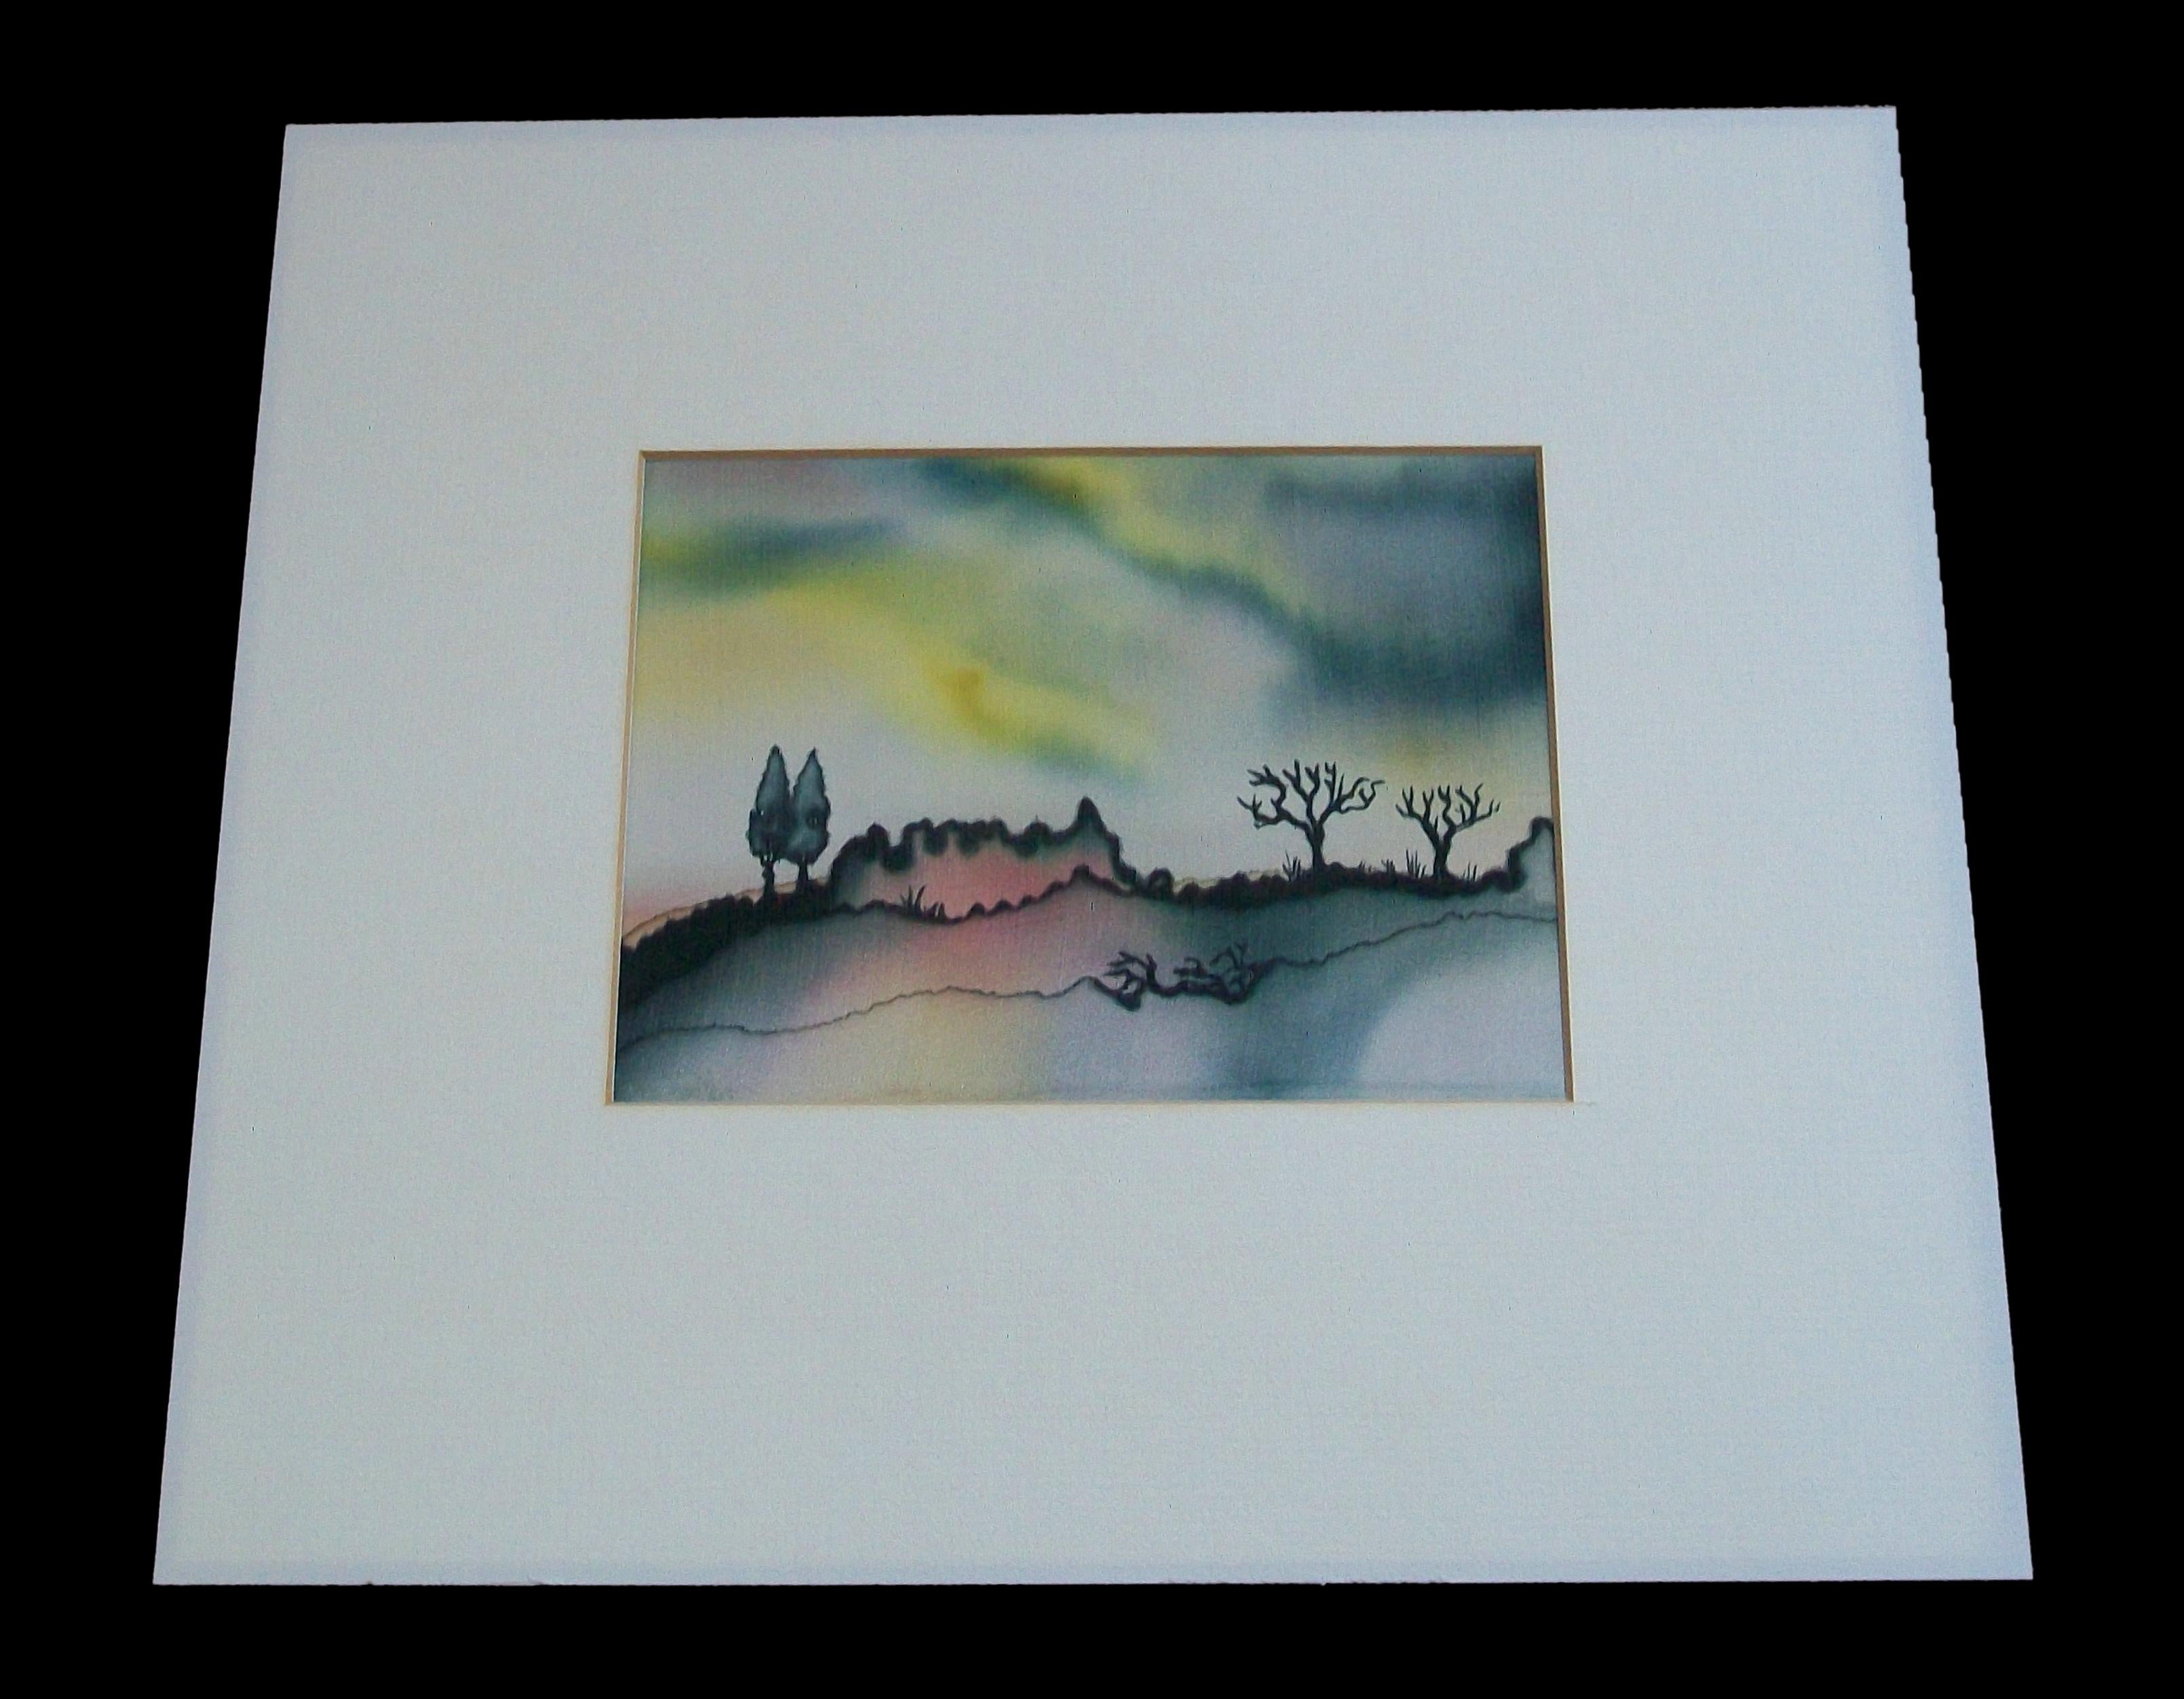 Hand-Painted German Expressionist Landscape Painting on Silk, Unsigned, Mid 20th Century For Sale